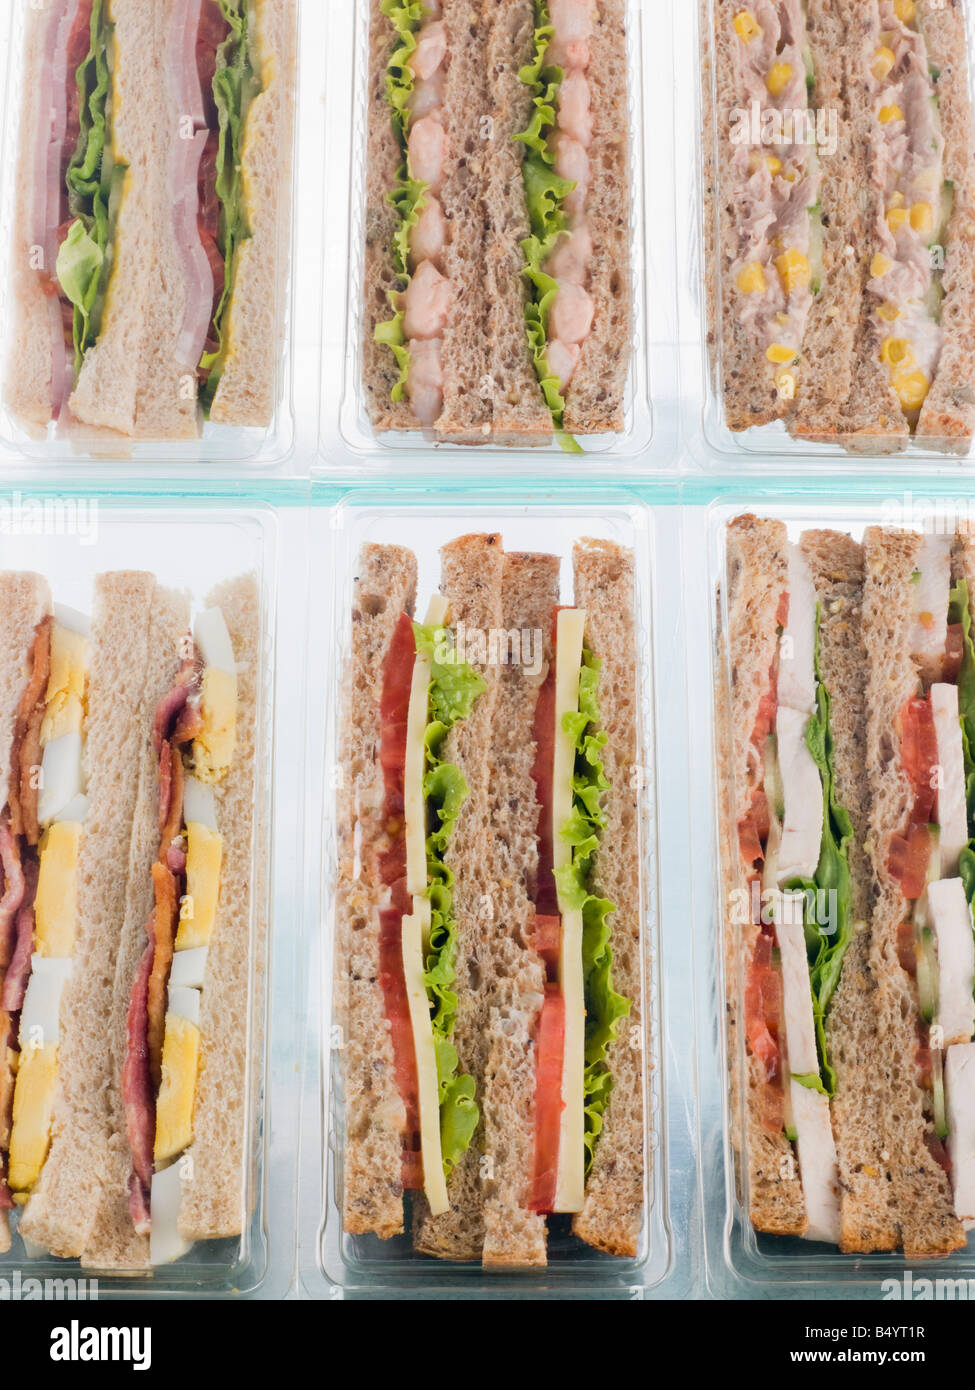 https://c8.alamy.com/comp/B4YT1R/selection-of-take-away-sandwiches-in-plastic-triangles-B4YT1R.jpg